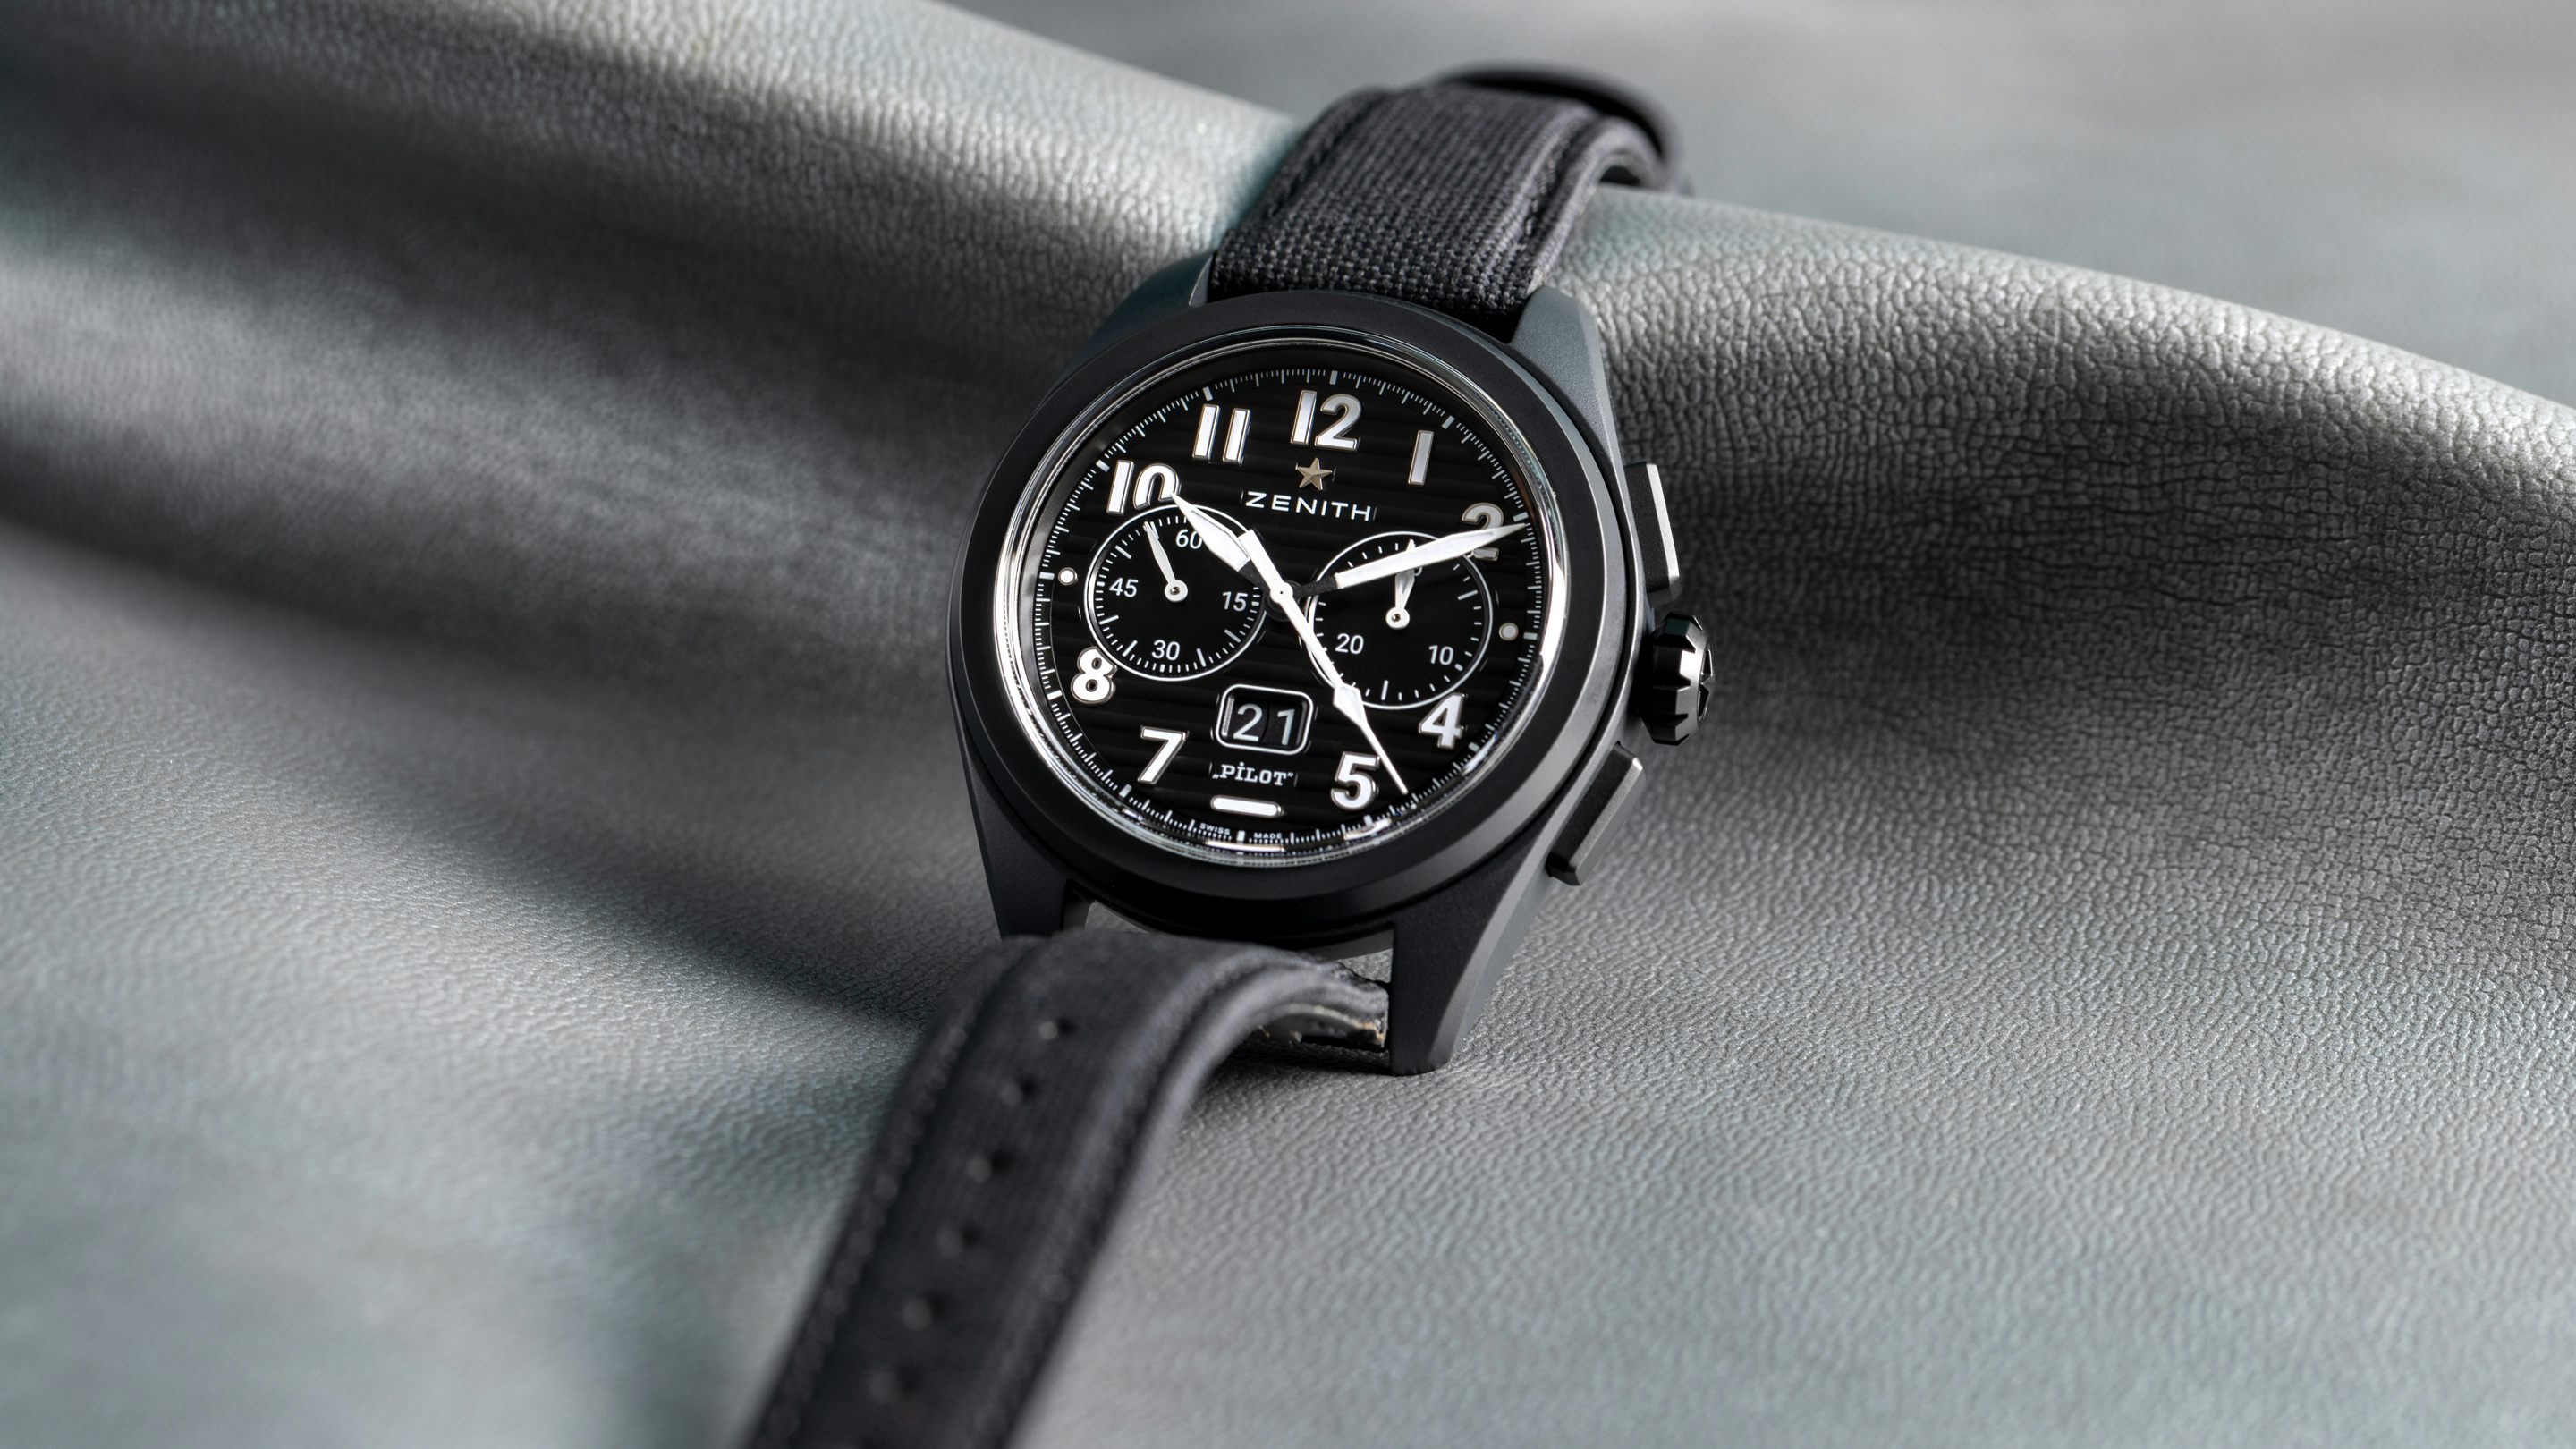 Introducing The New Zenith Pilot Automatic And Pilot Big Date Flyback